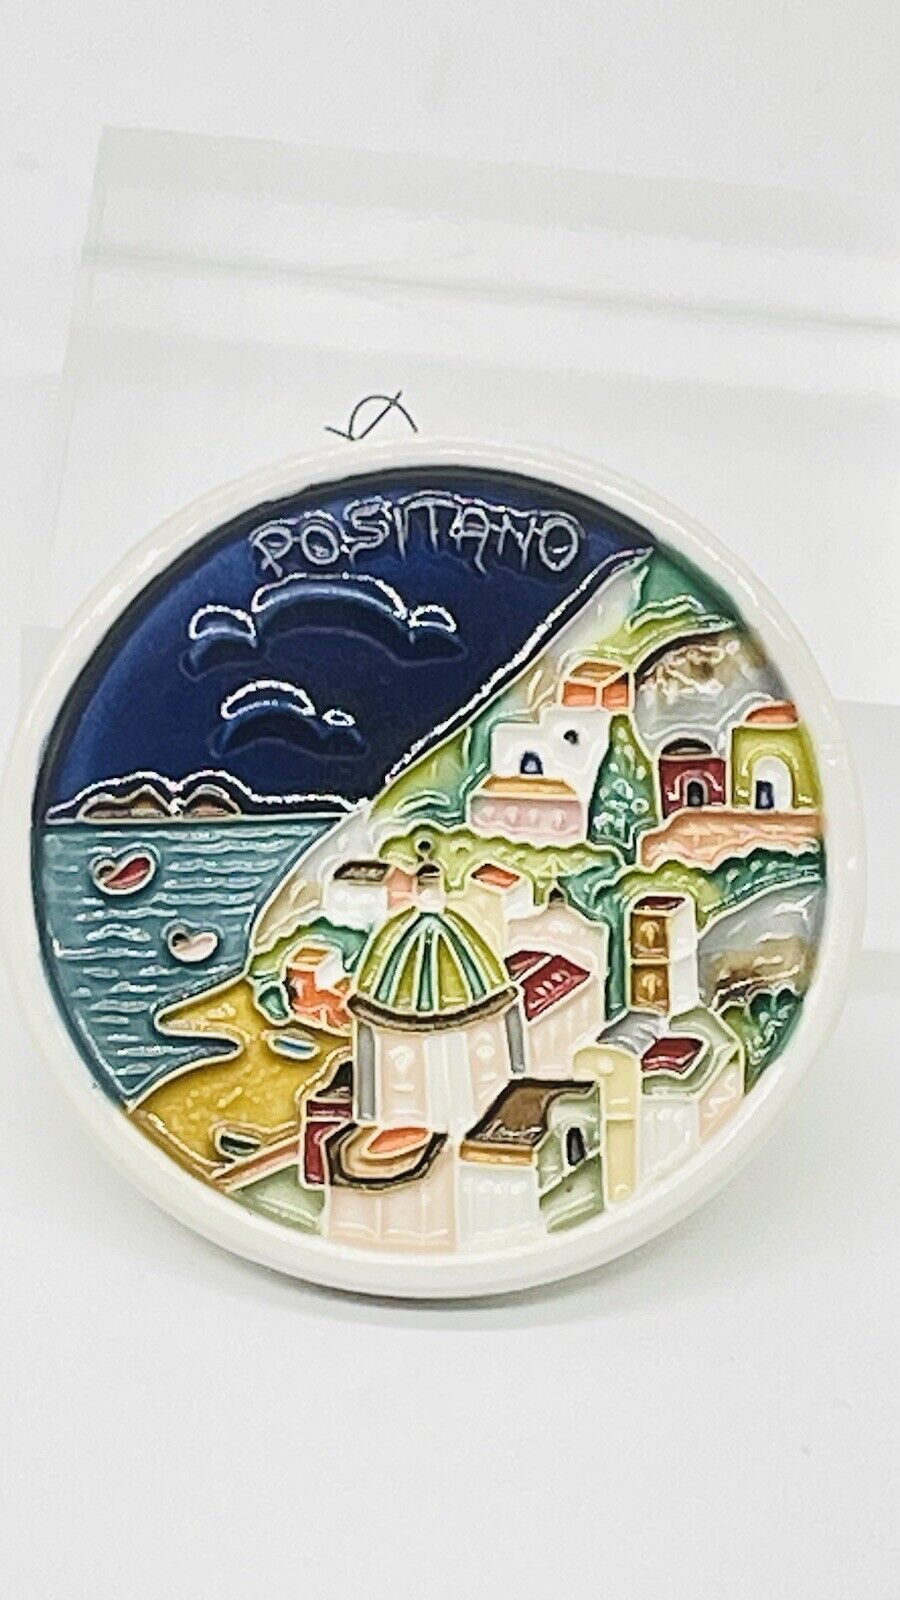 POSITANO WALL TILE/PLAQUE AMALFI COAST MADE IN ITALY  4.5” Round Colorful Tile